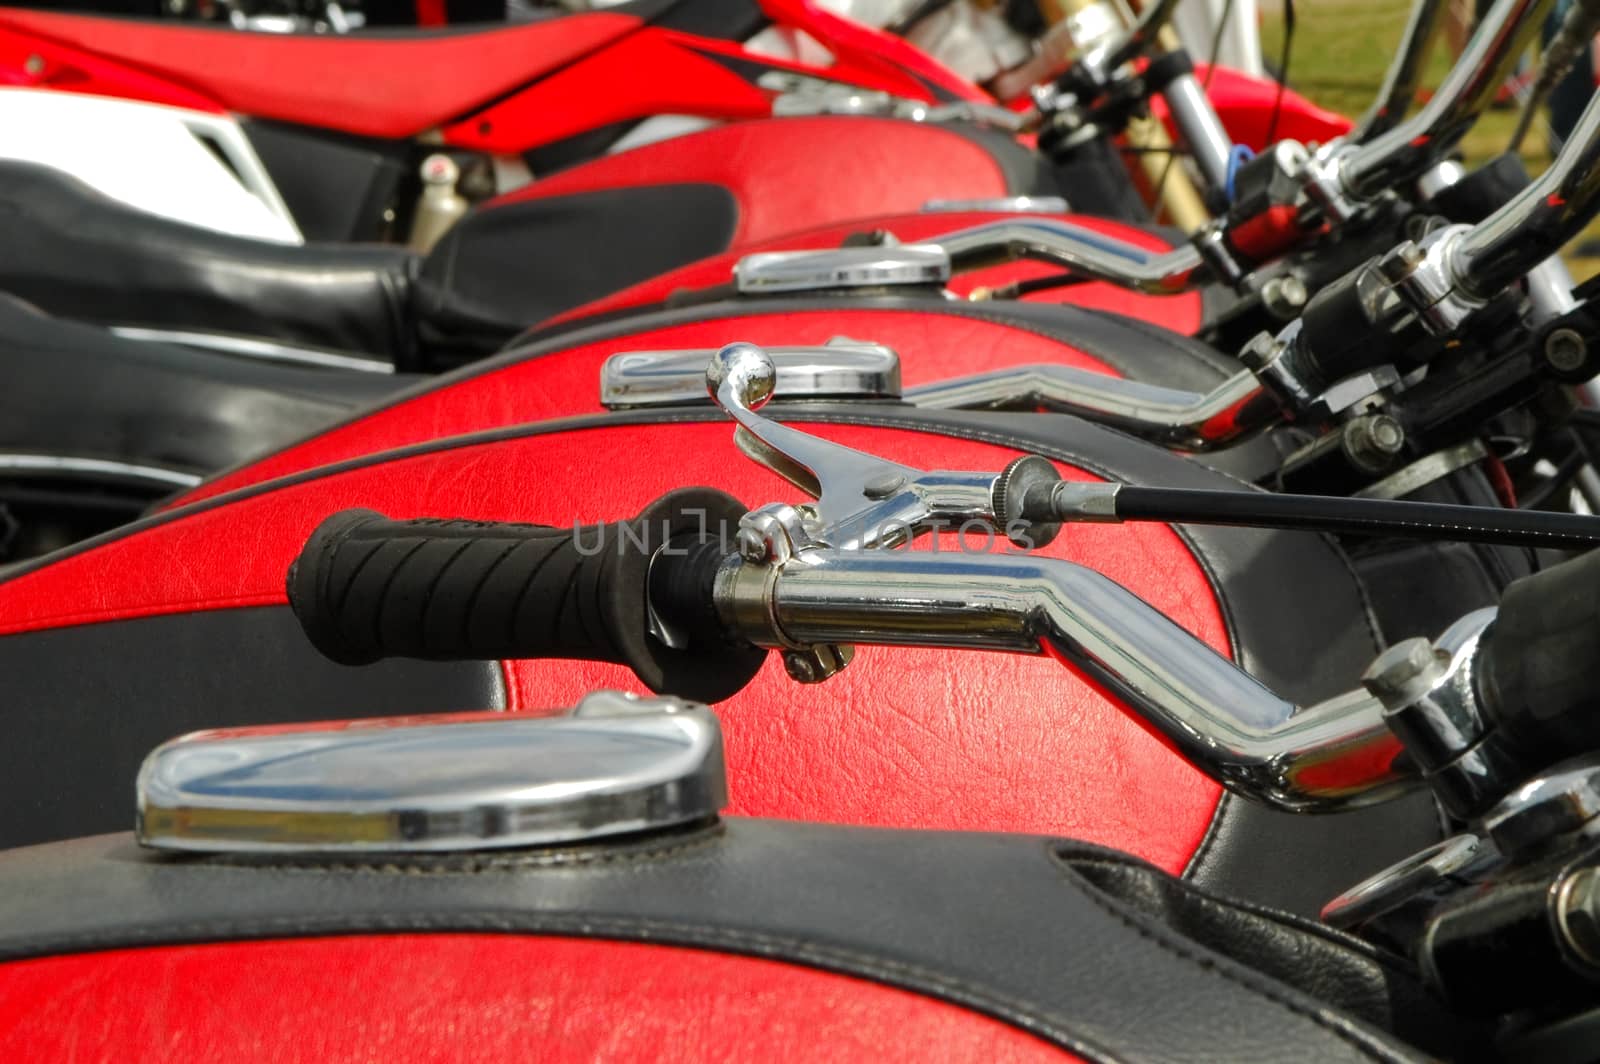 line of motorcycles with matching fuel tank covers